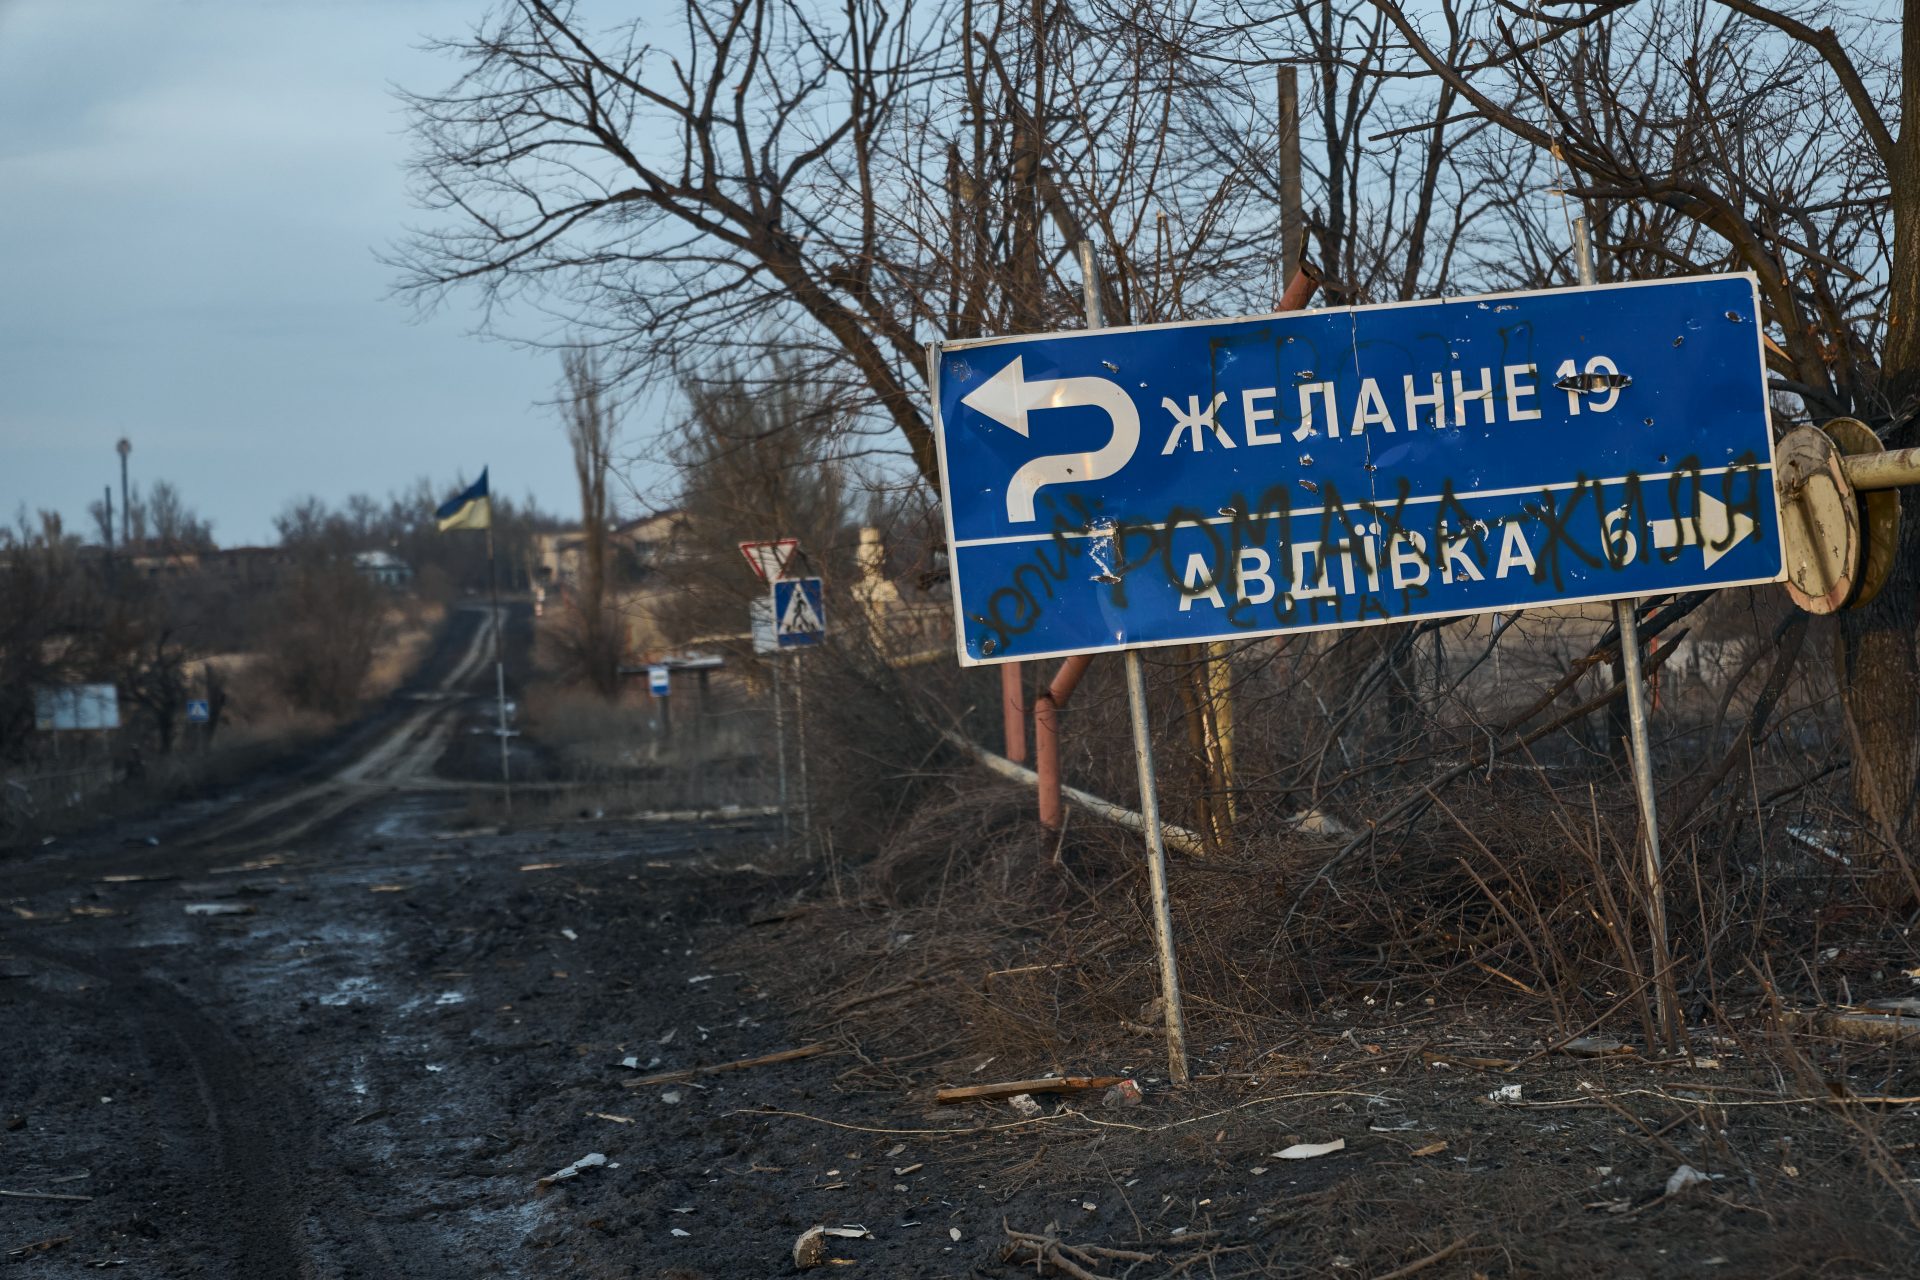 The aftermath of Avdiivka's fall